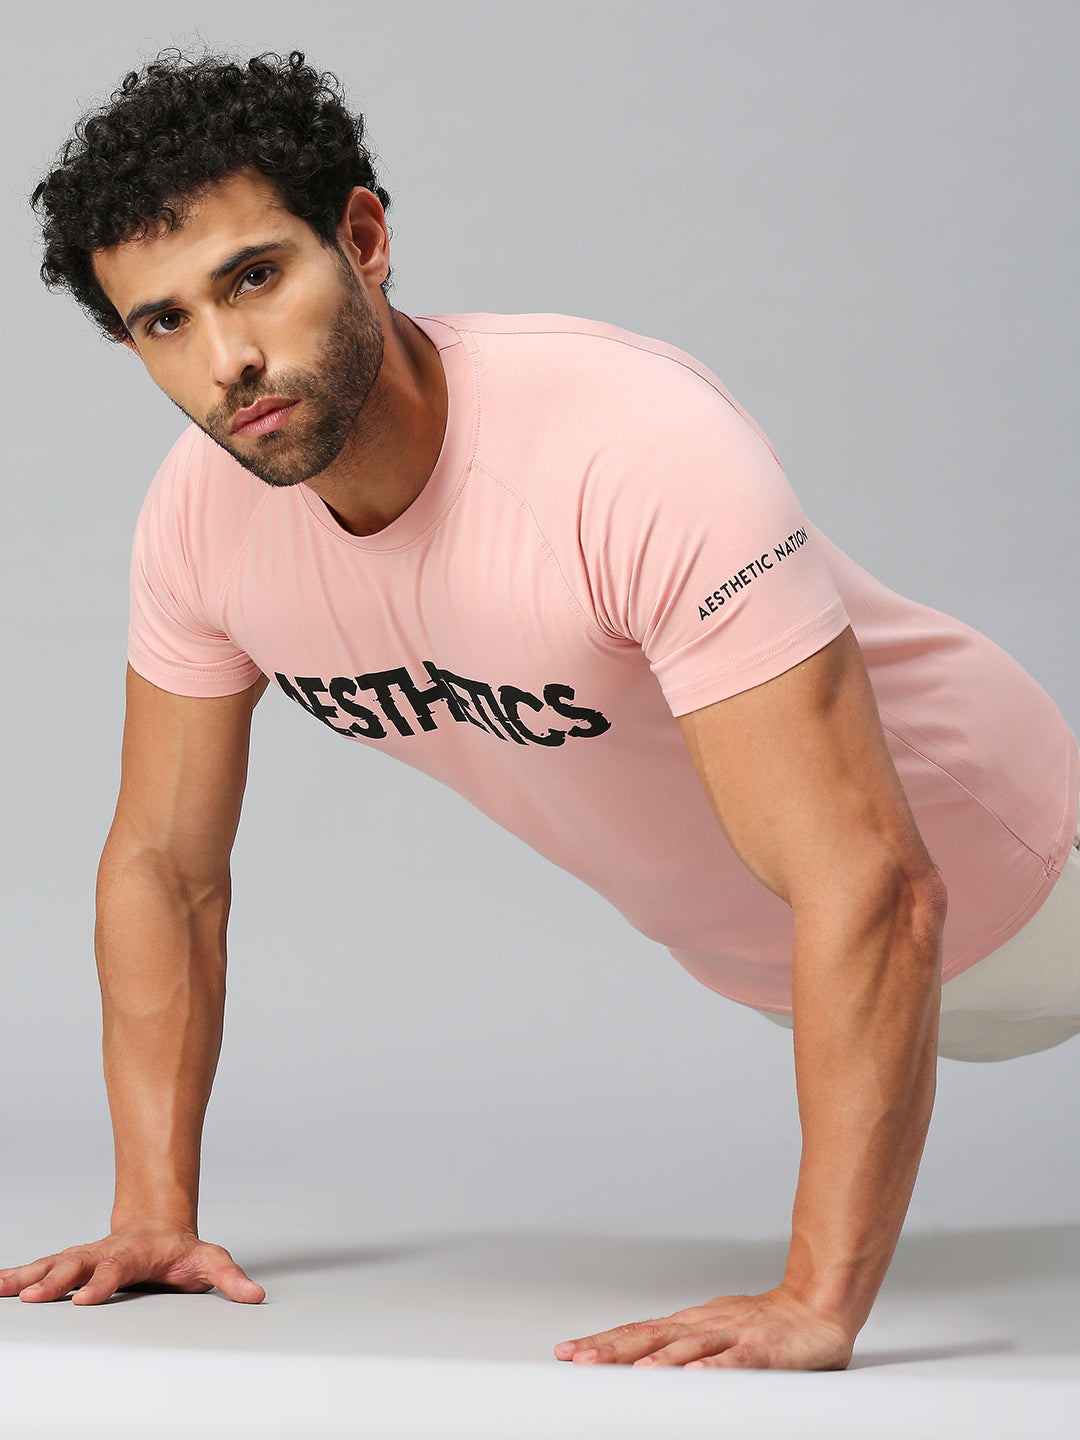 Buy Gym Workout Wear For Men Online In India